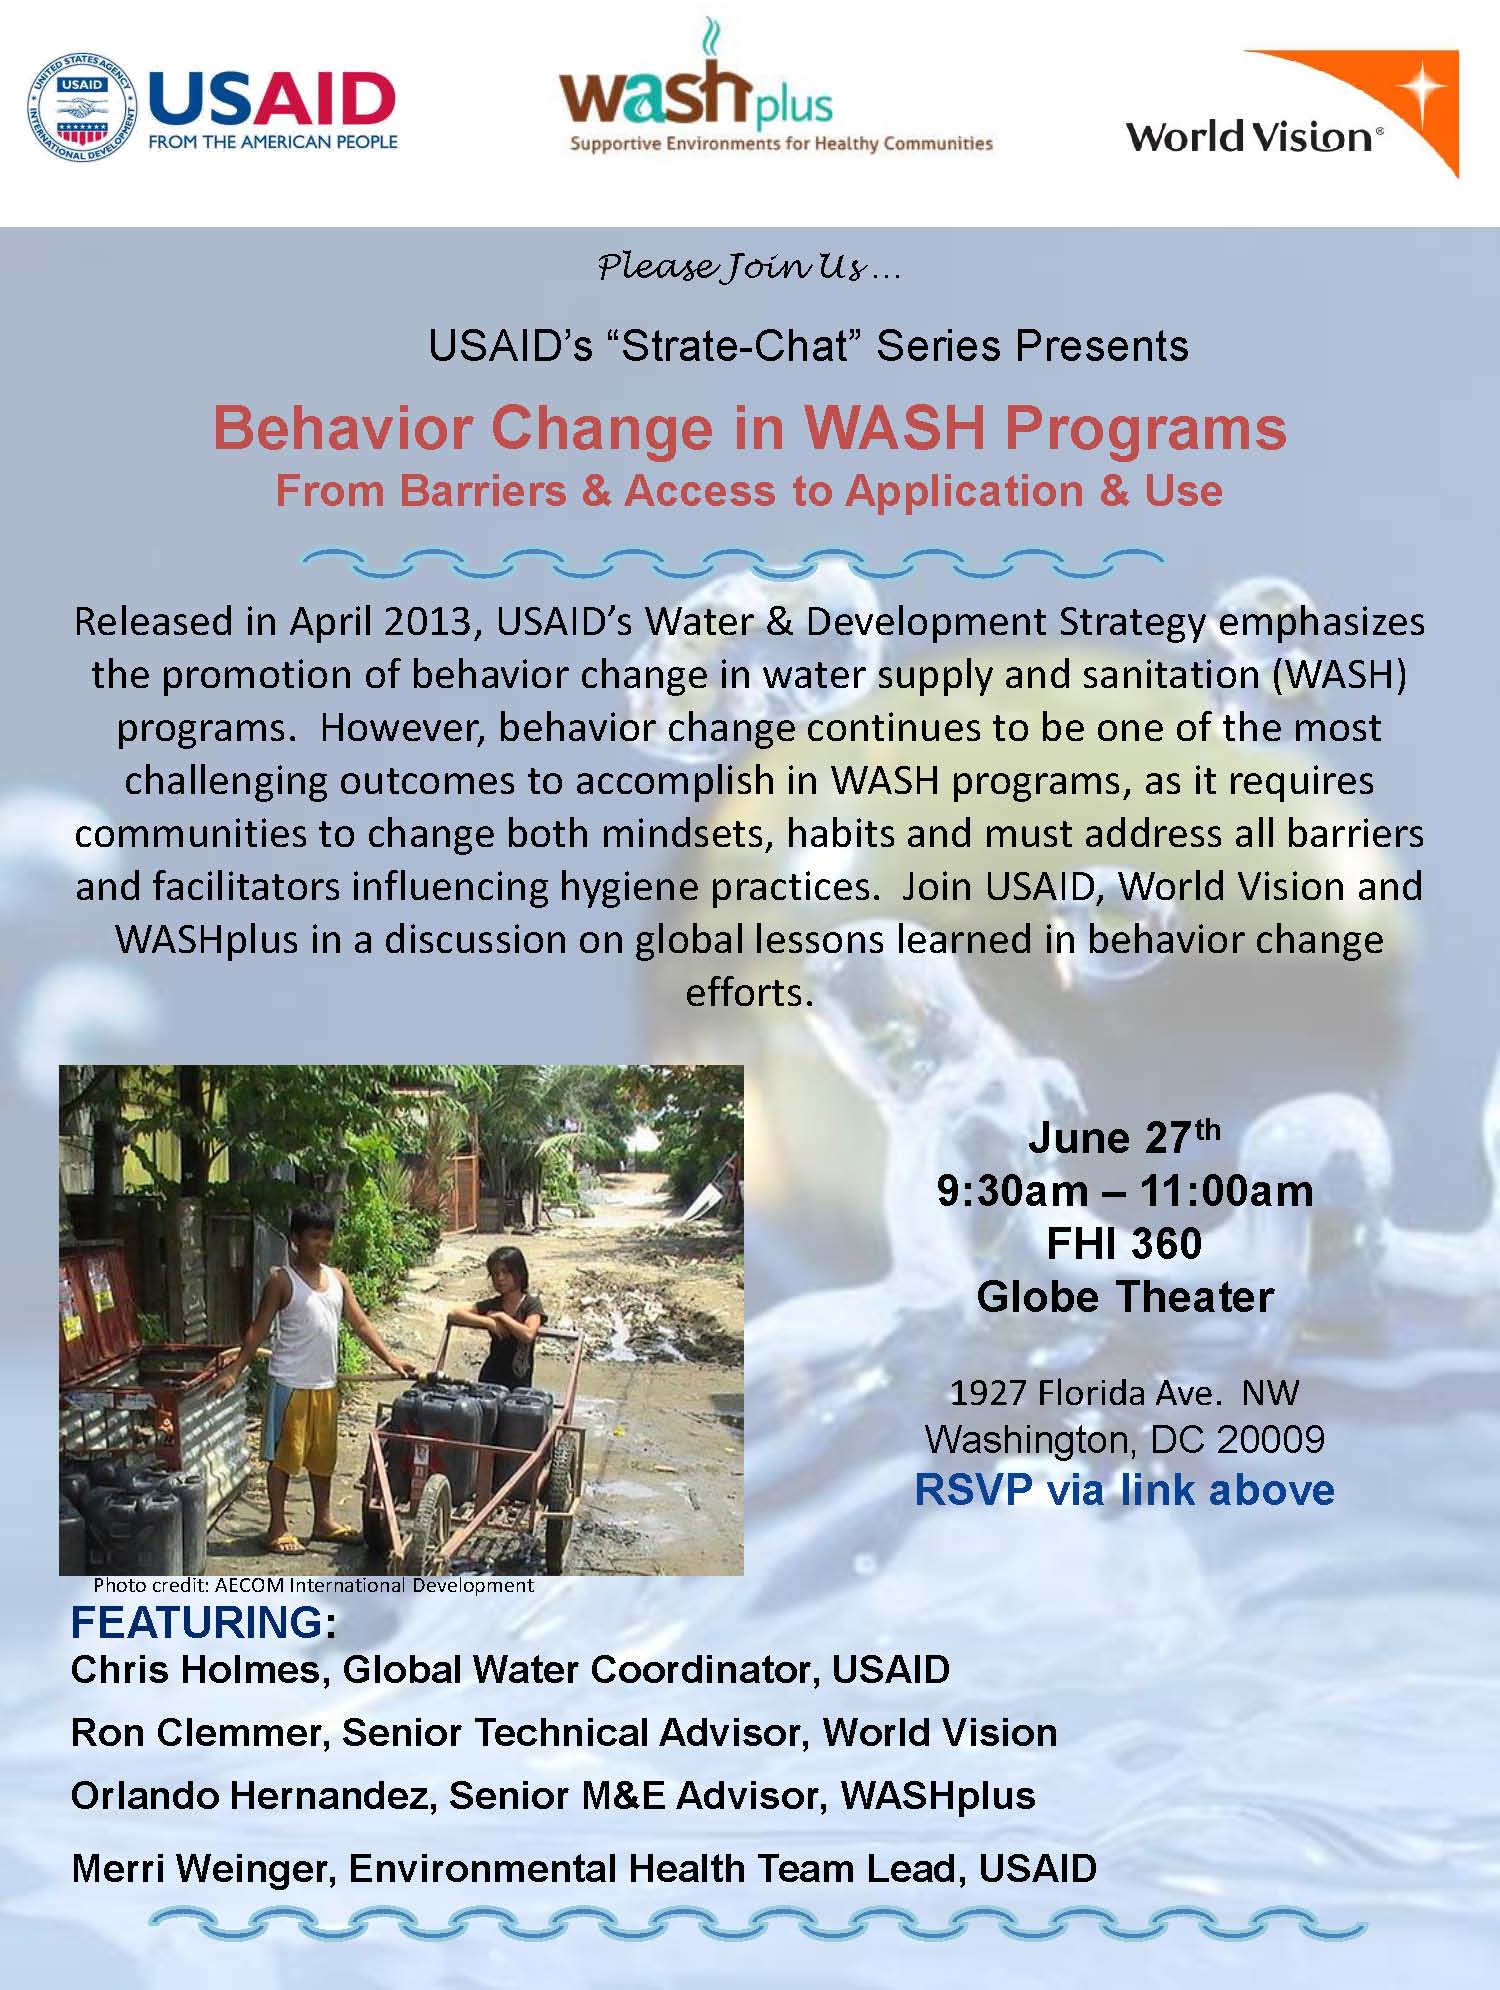 Invitation from the Behavior Change in WASH Programs: From Barriers & Access to Application & Use learning event.